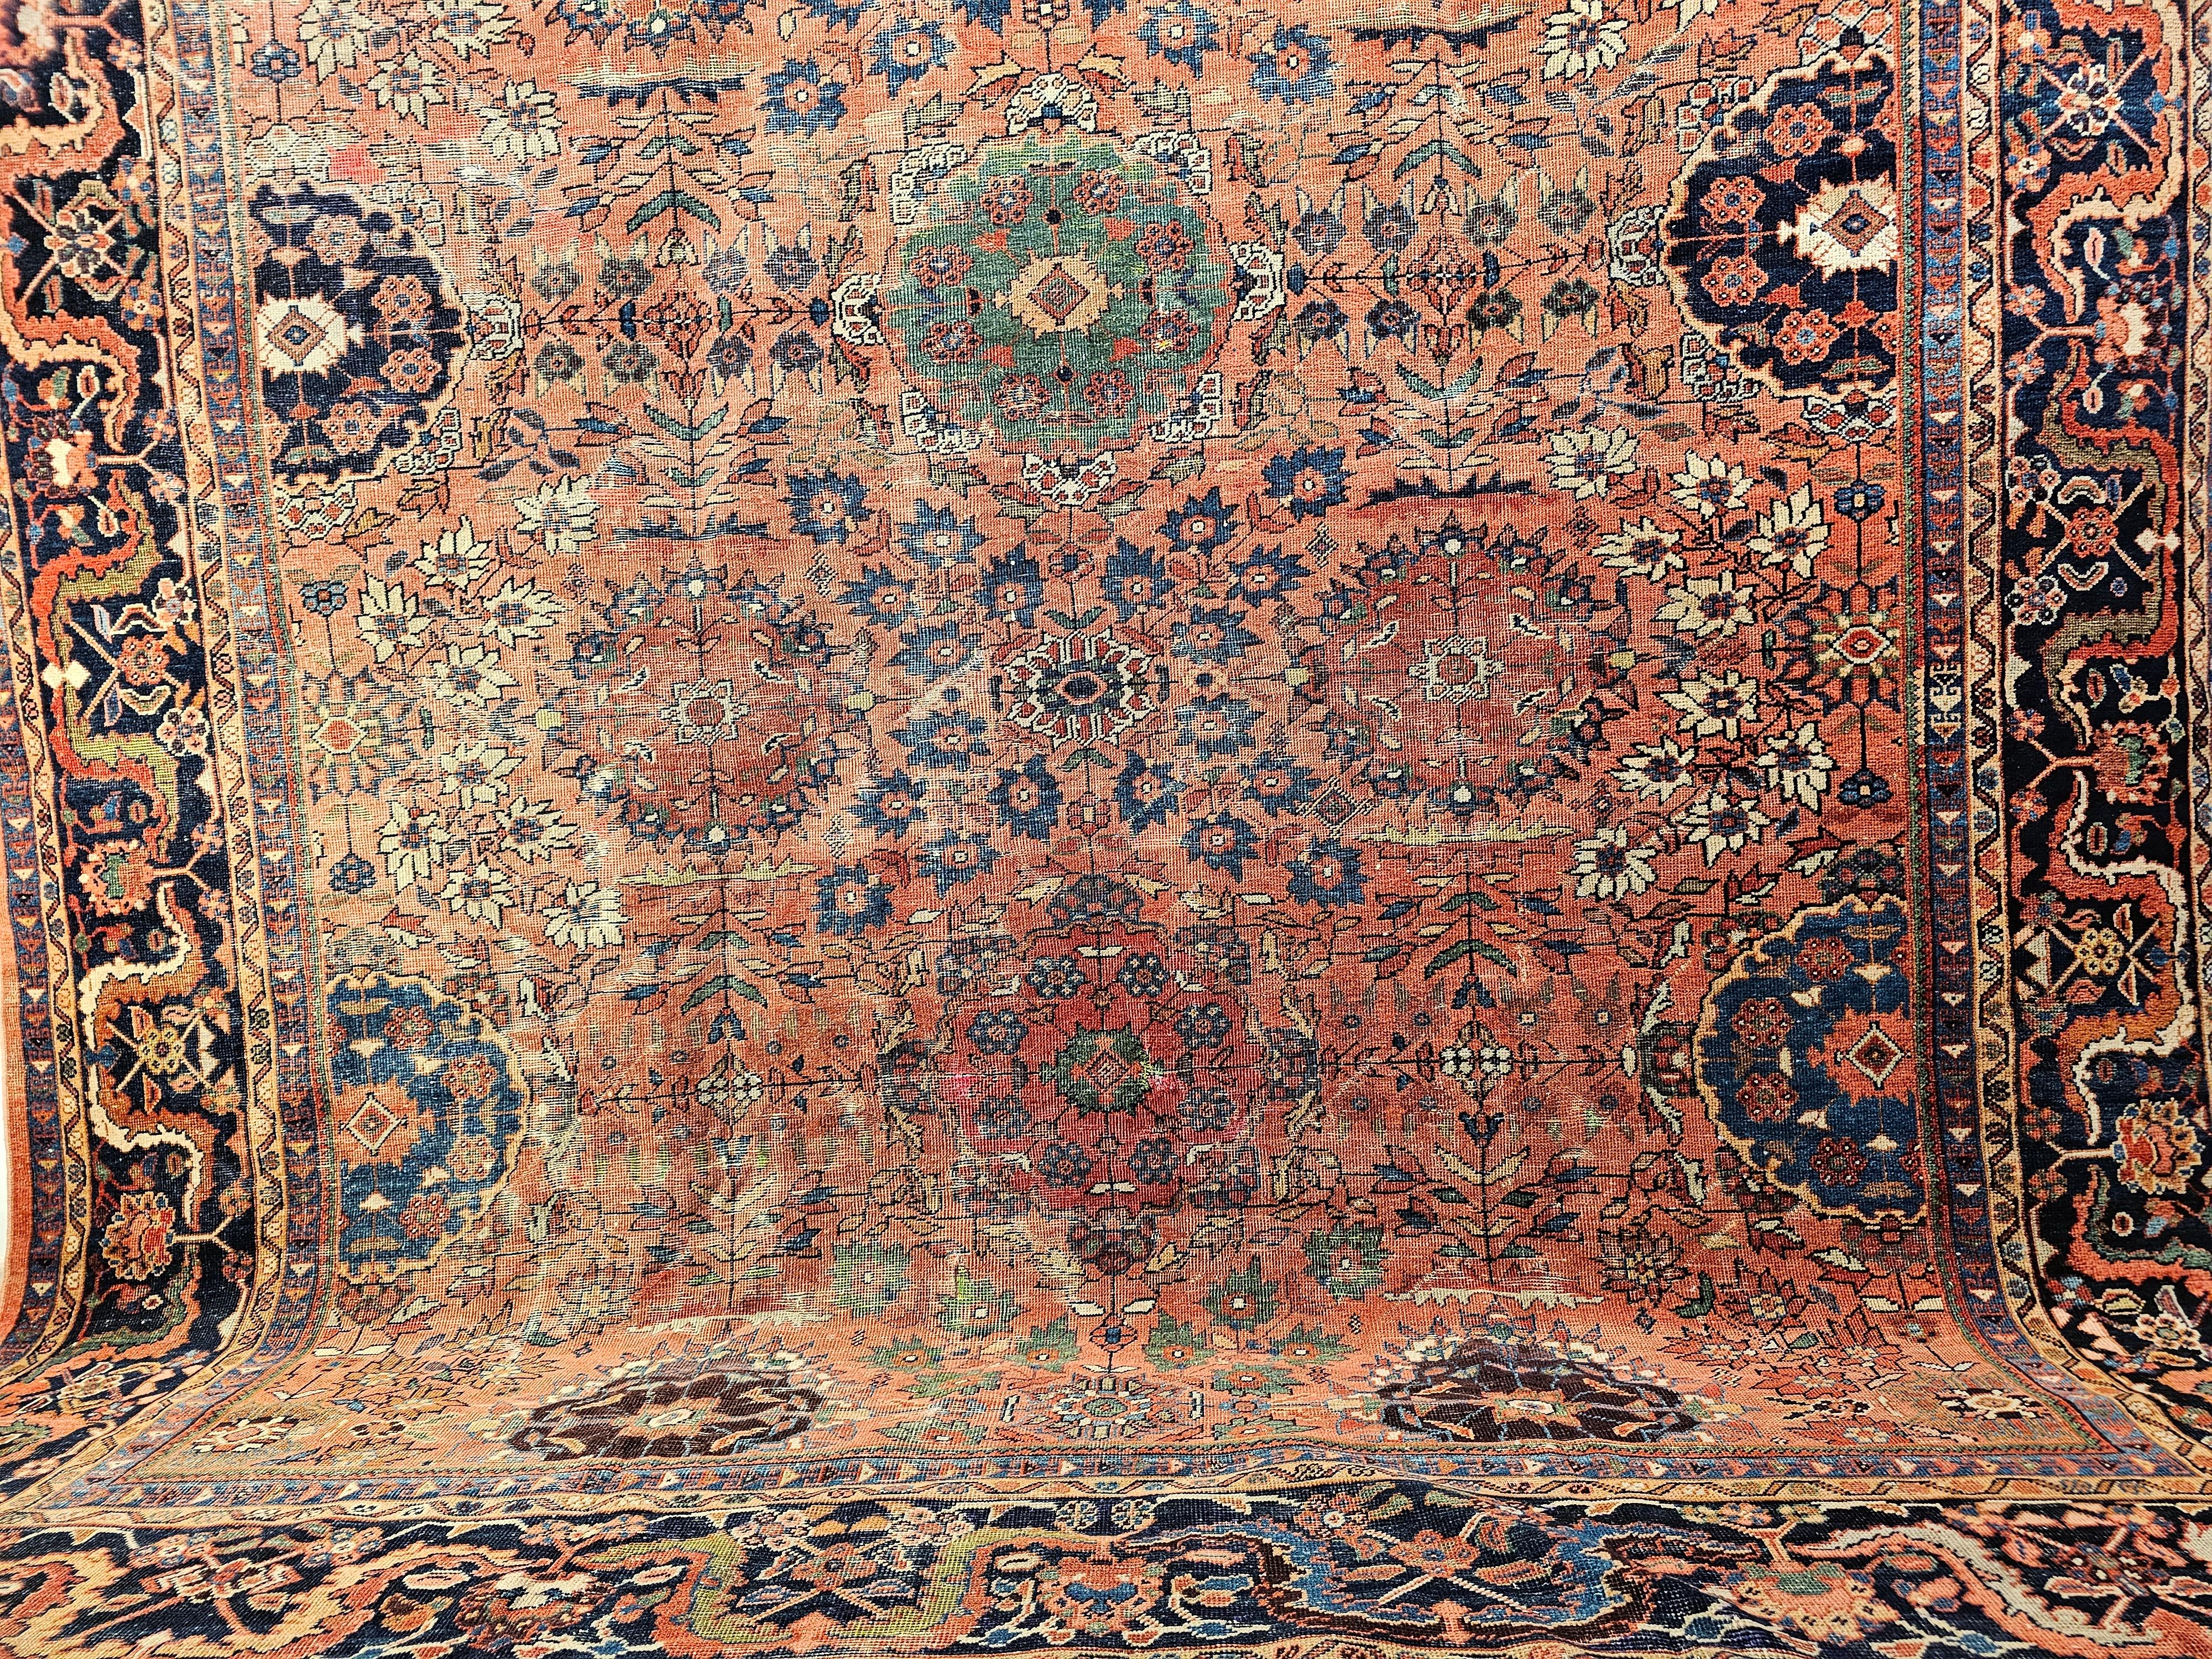 Beautiful Persian Mahal Sultanabad room size rug with an all over design pattern in a brick red field color with medallions in green, French blue, burgundy, apricot, and brown colors from the late 1800s.   The rug has a rust-red field color with